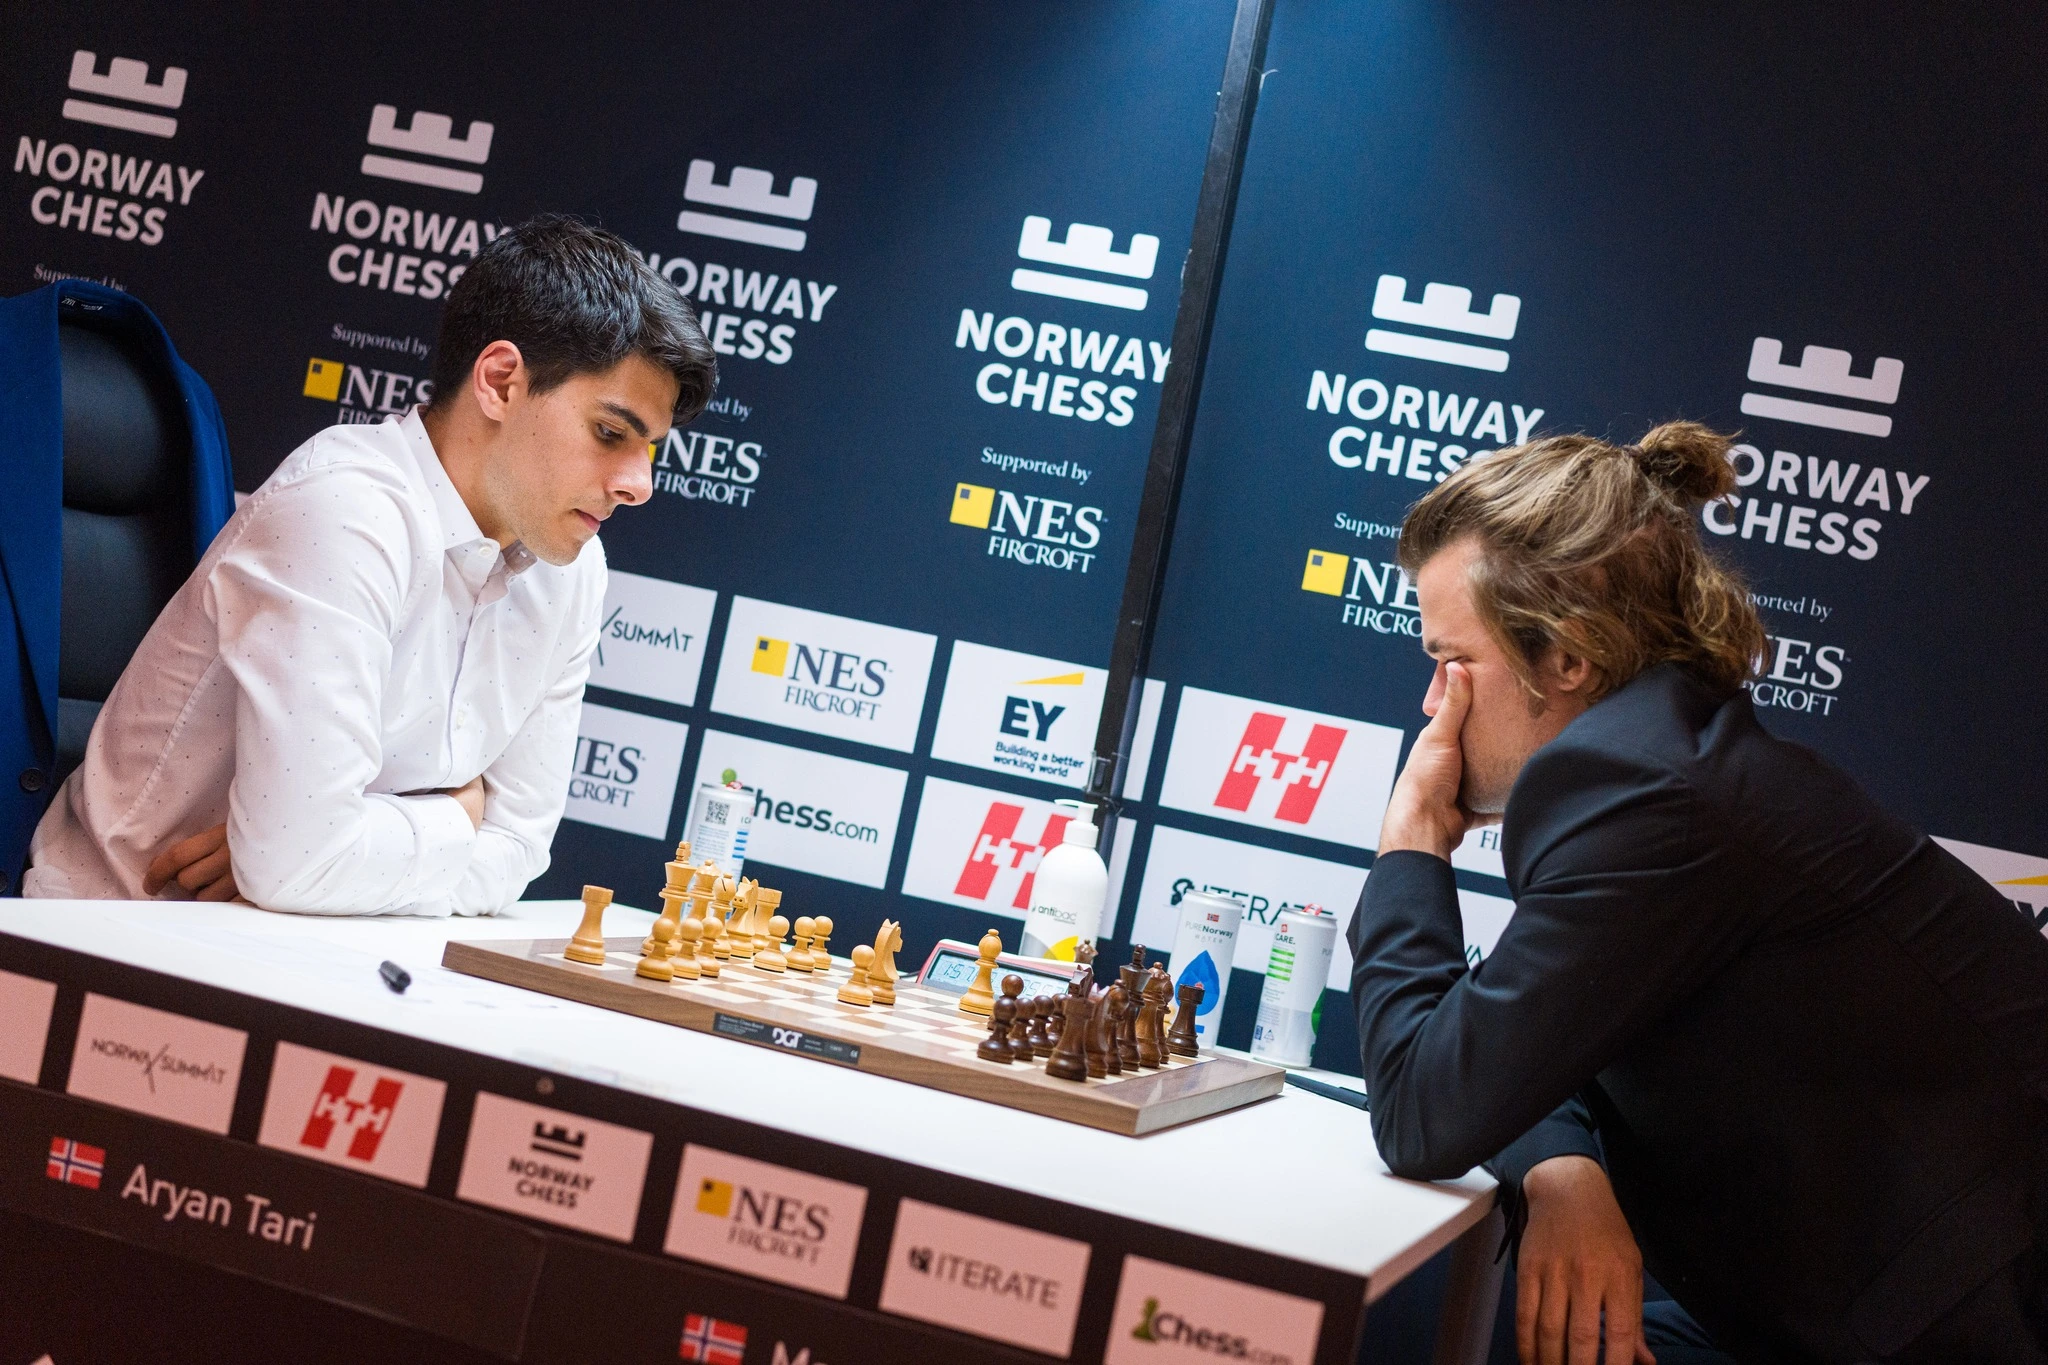 The upcoming NorwayChess, May 29-June 9, will host Magnus Carlsen